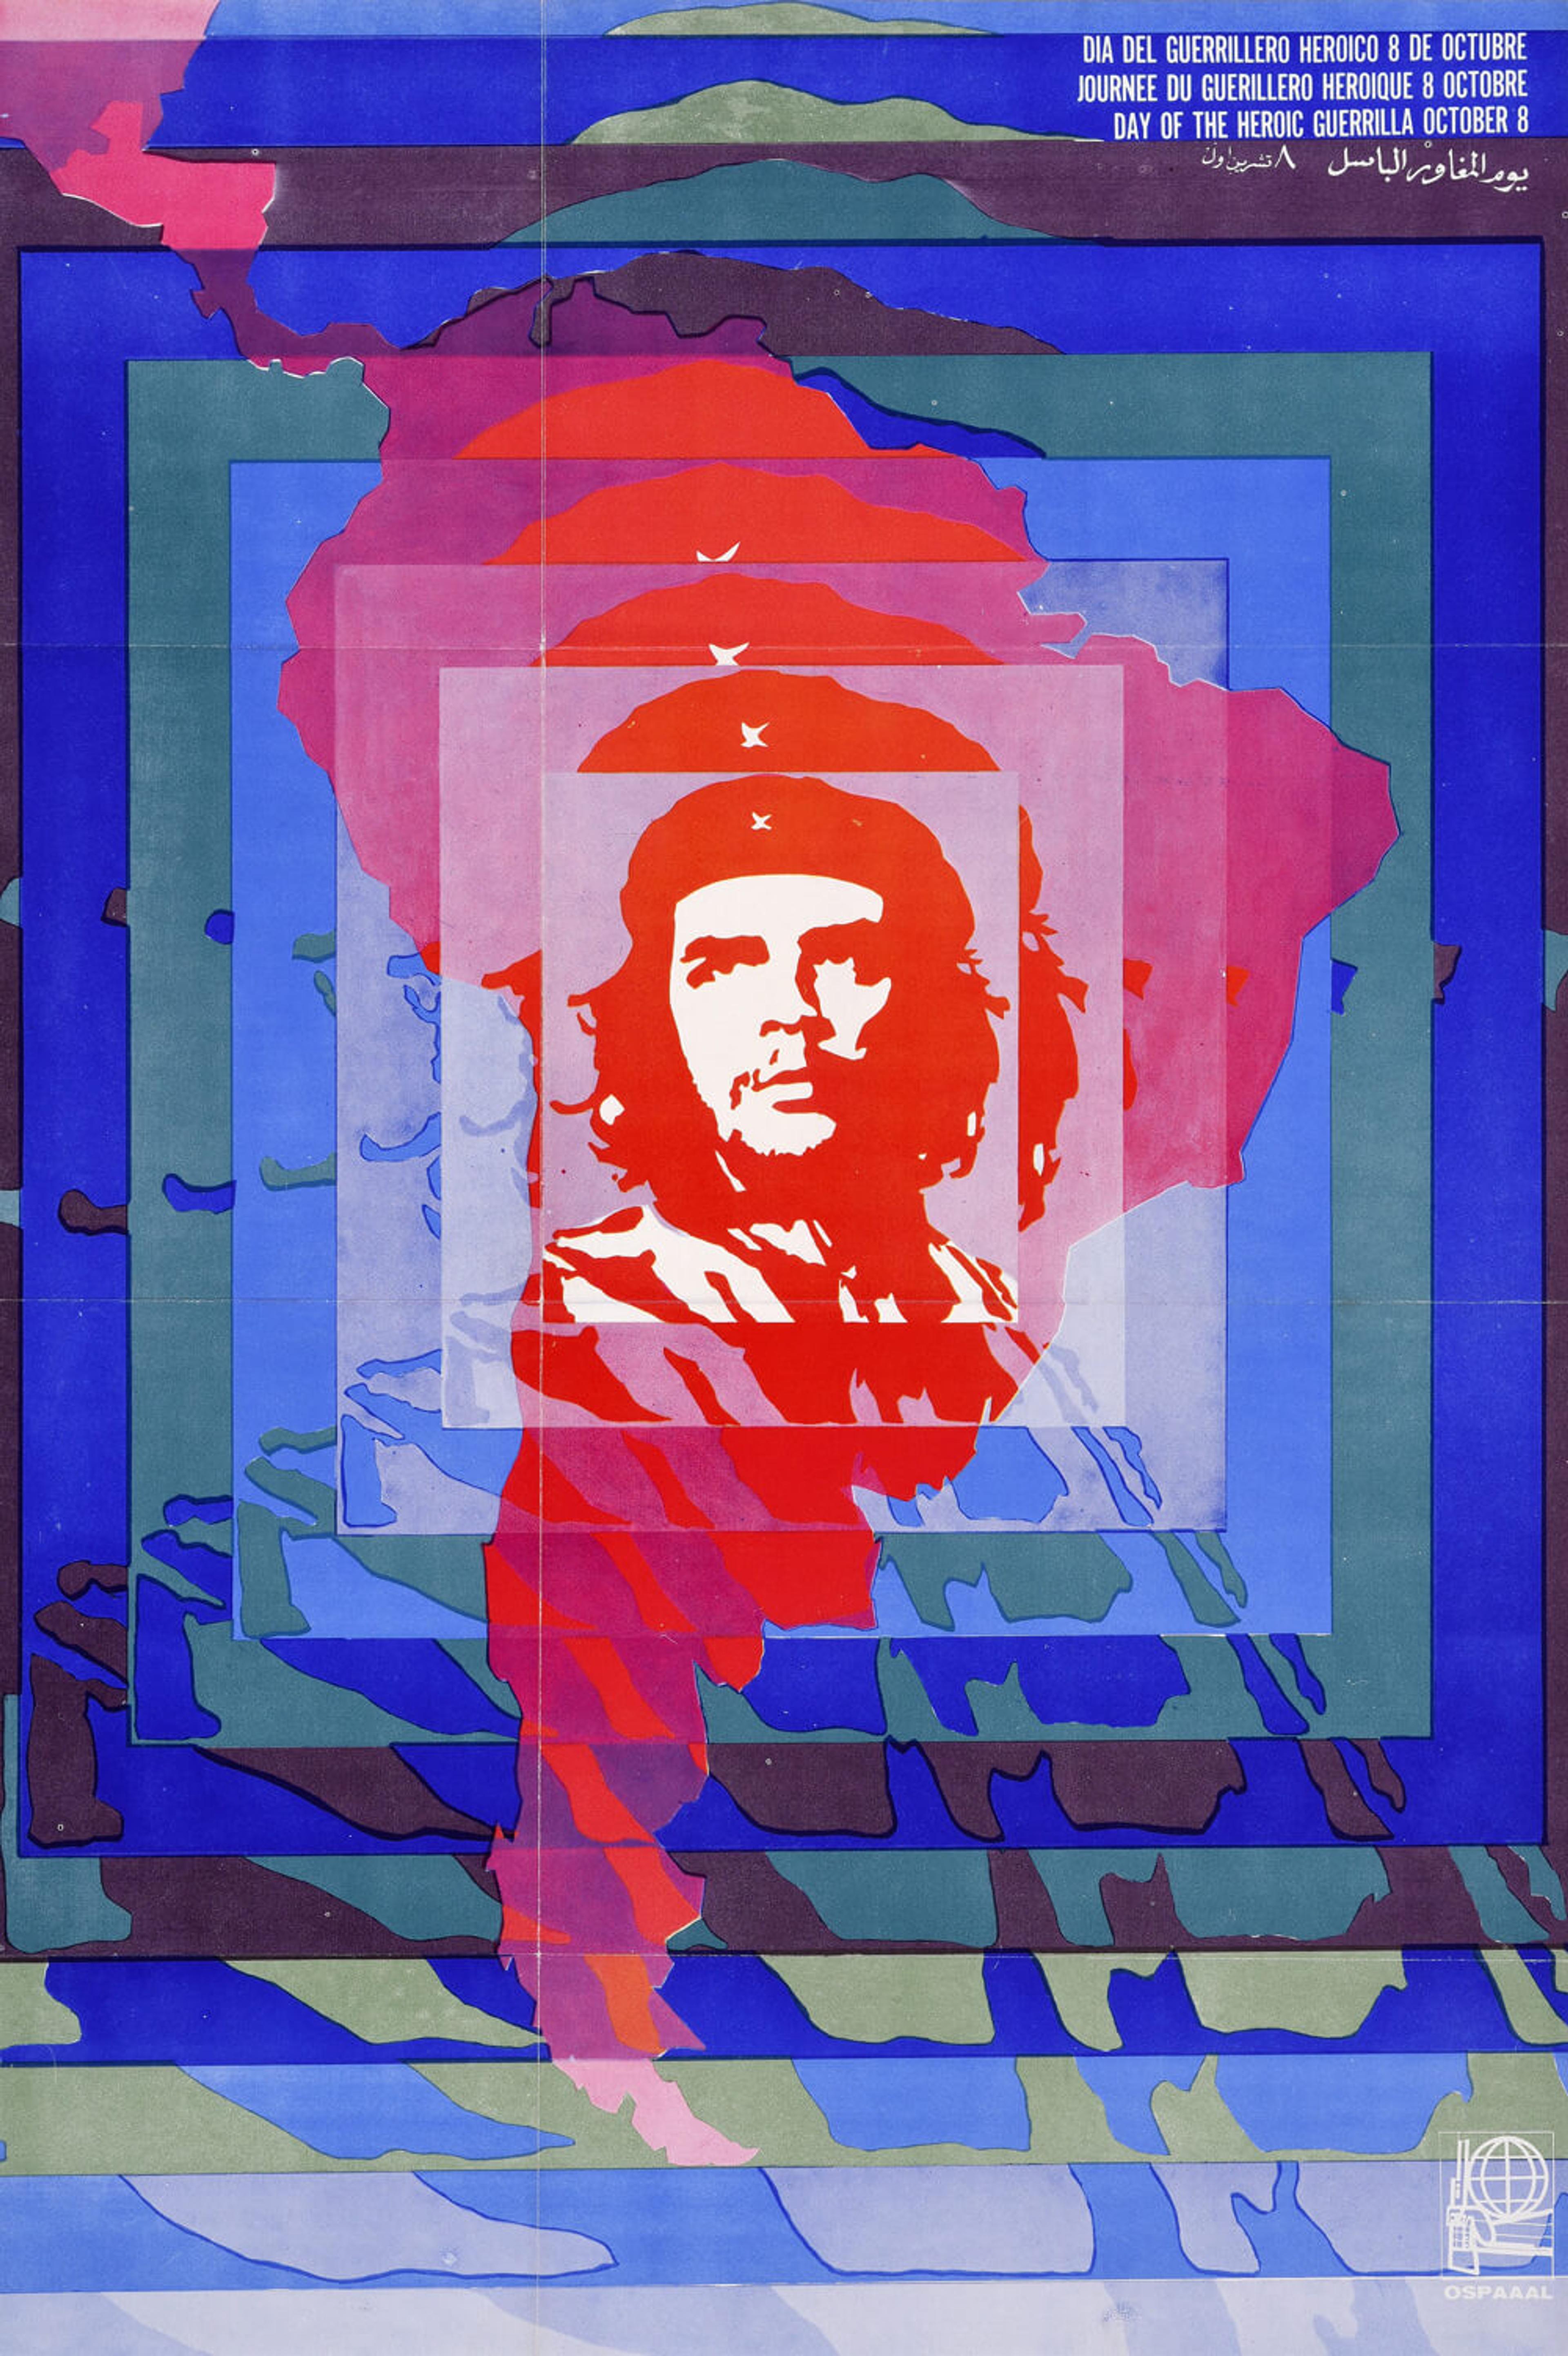 A colourful poster of Che Guevara's face superimposed over a map of South America